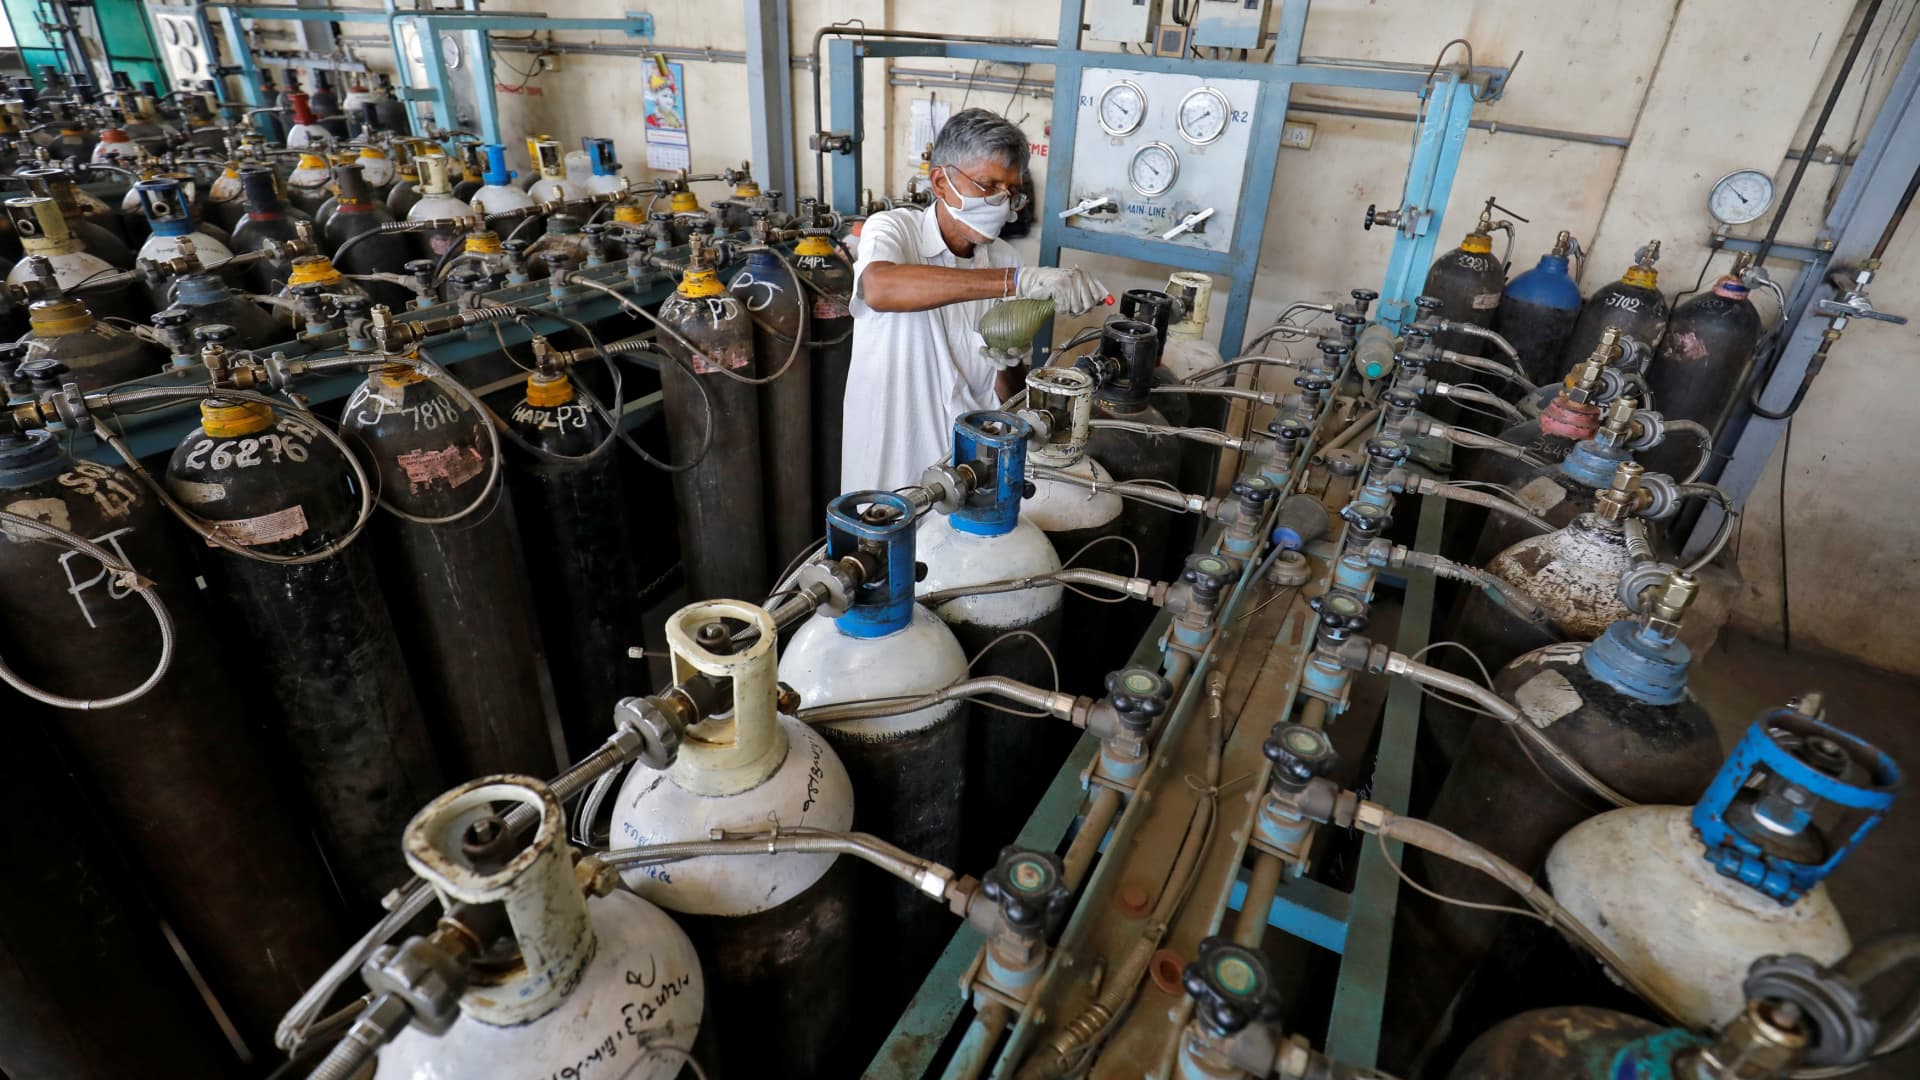 A worker disinfects nozzles of oxygen cylinders as they are refilled in a factory, amidst the spread of the coronavirus disease (COVID-19) in Ahmedabad, India, April 25, 2021.